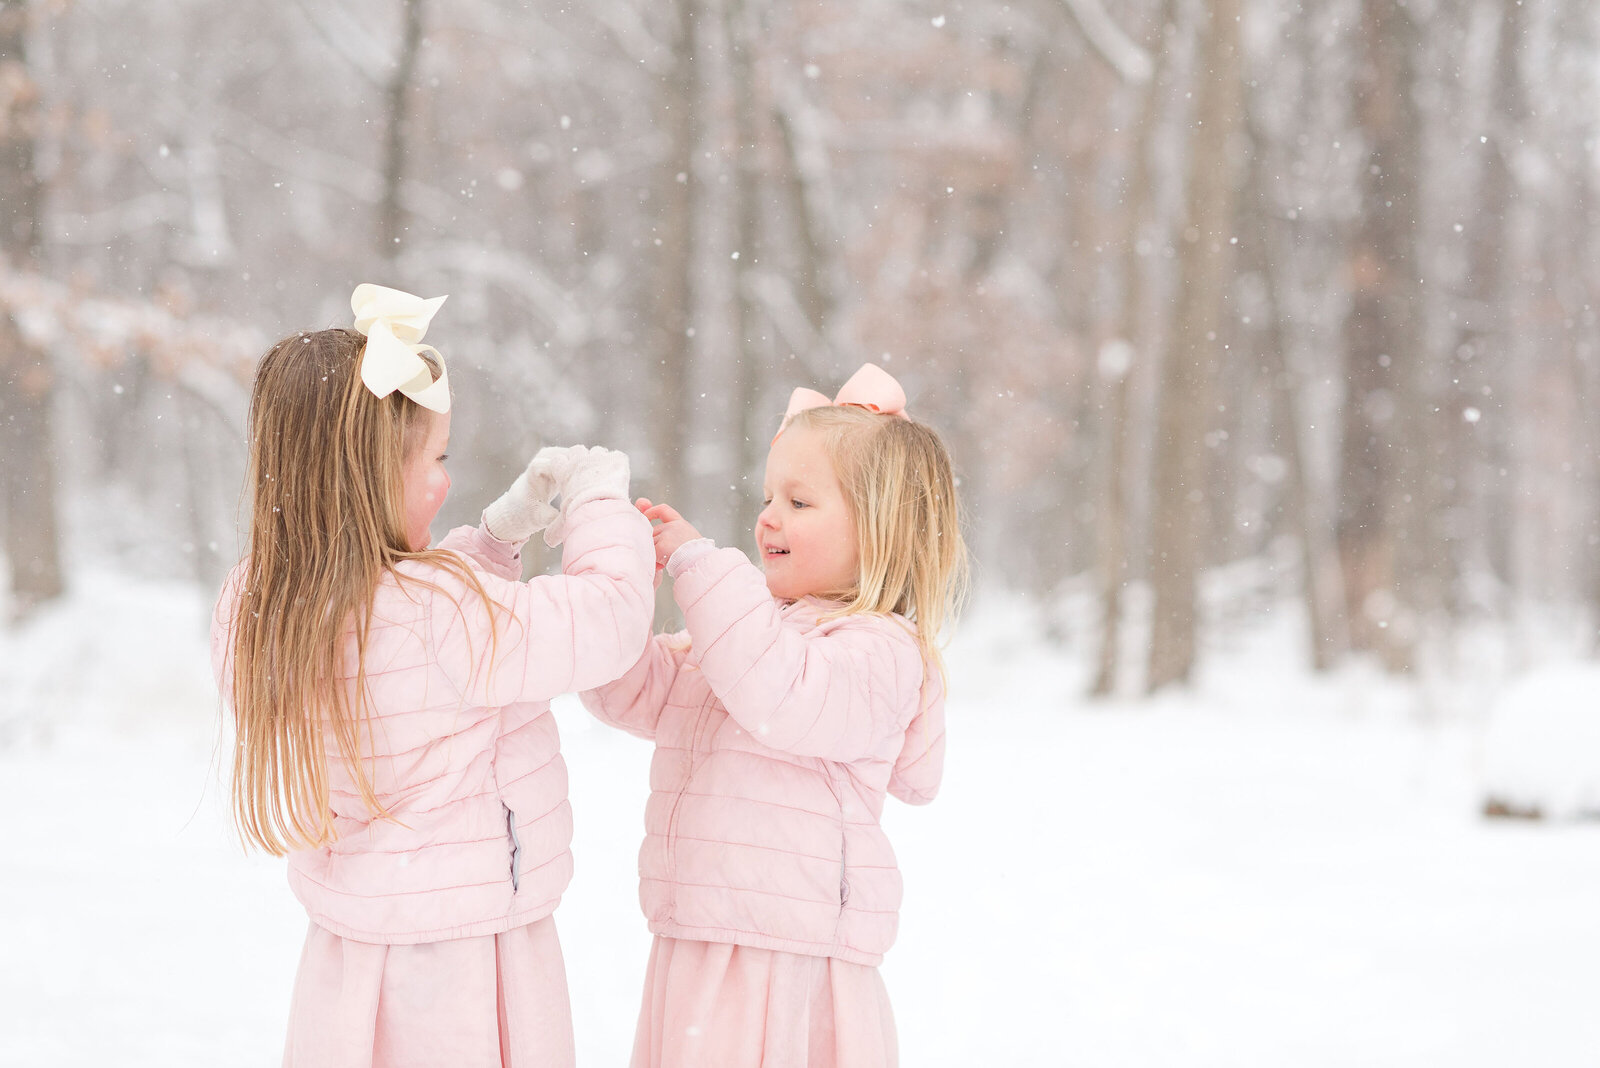 Two young sisters in pink coats play in snow